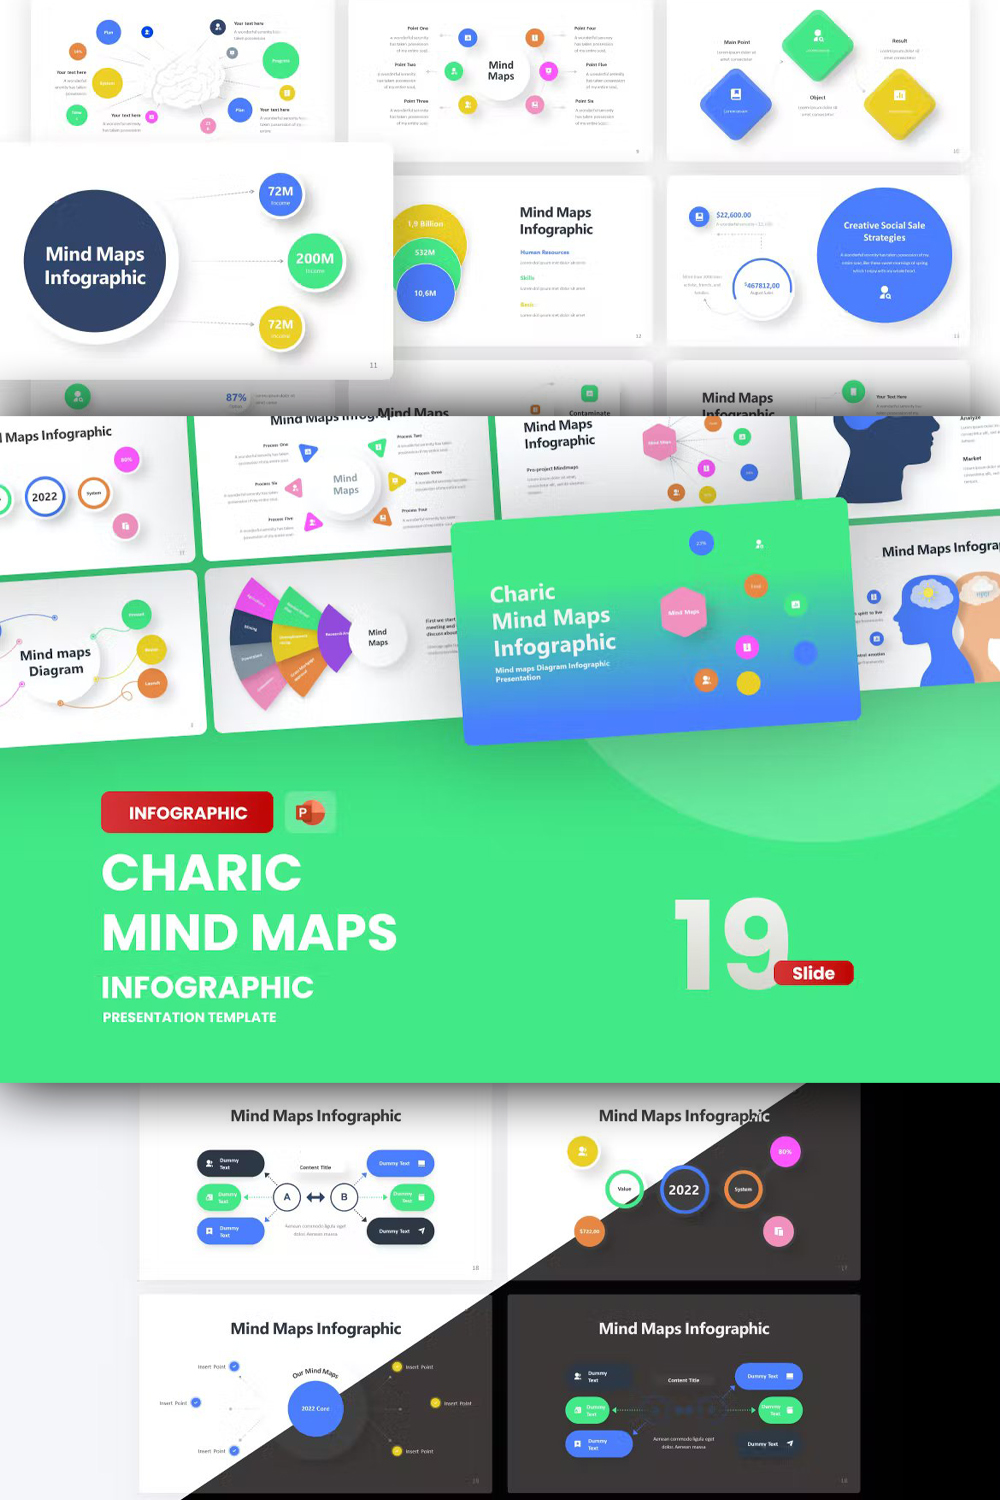 Mind maps diagram of Charic Mind Maps Infographic.